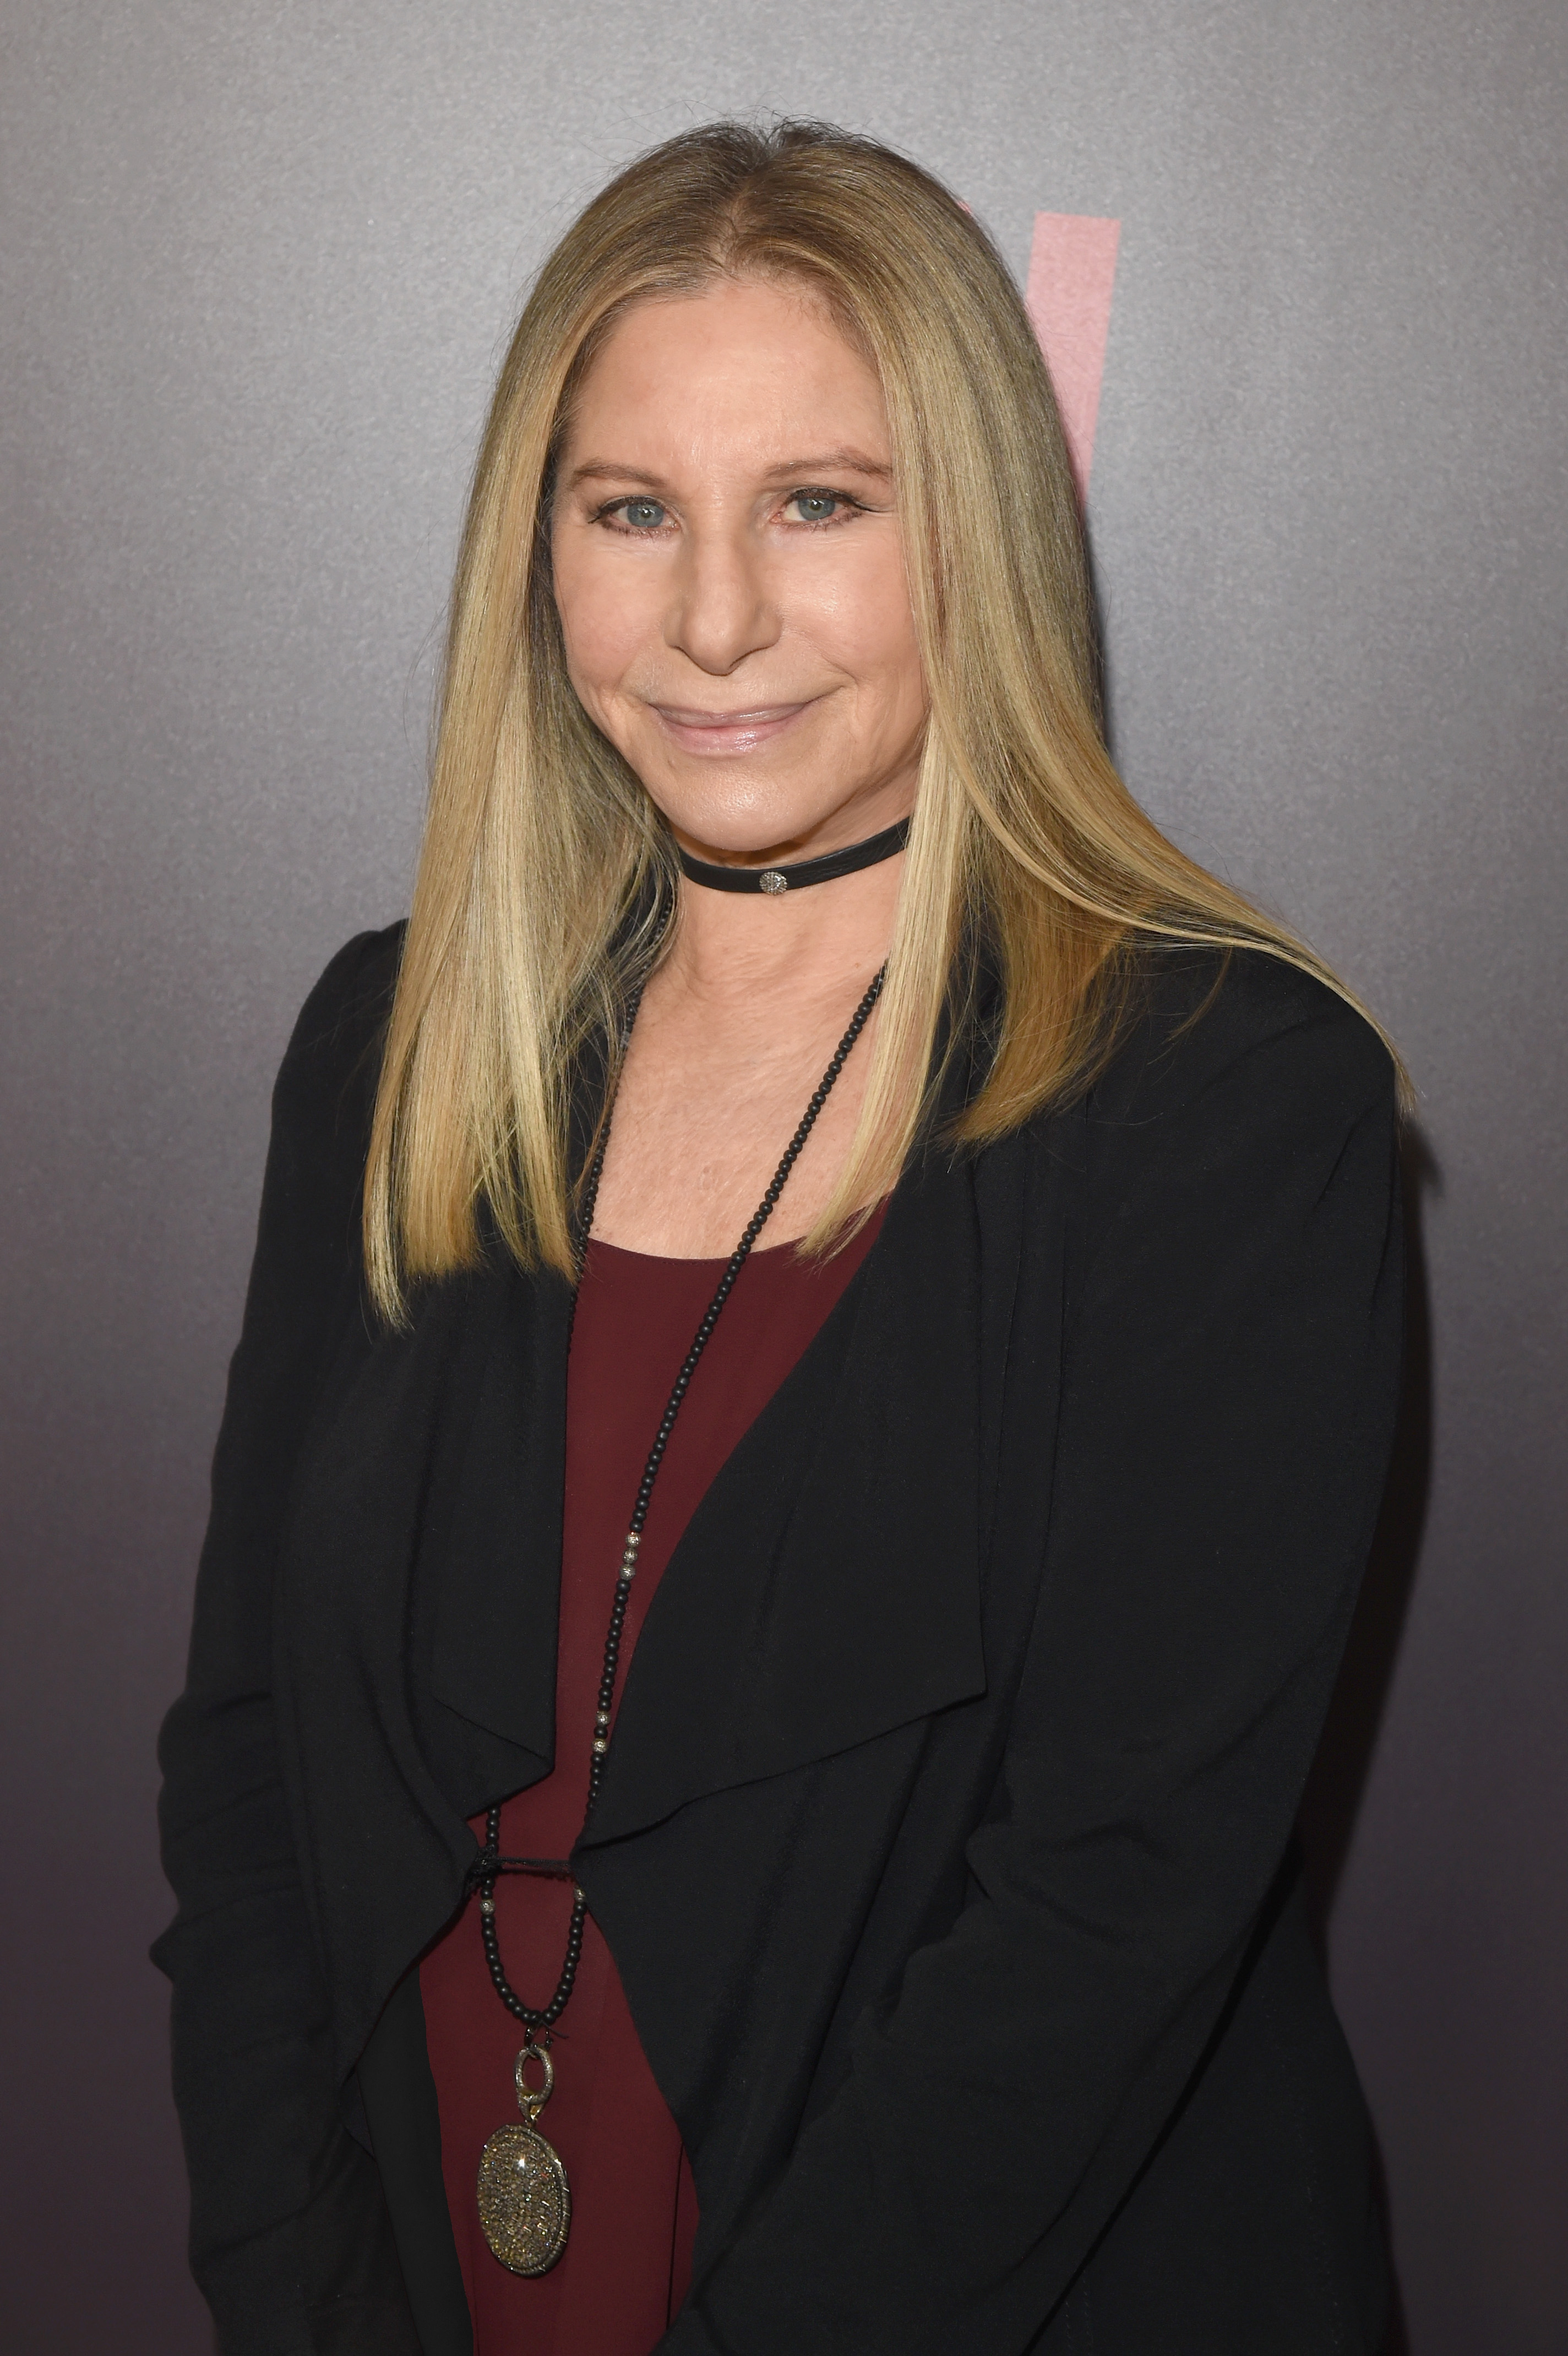 Barbra Streisand attends Barbra Streisand and Jamie Foxx in Conversation at Netflix's FYSEE at Raleigh Studios in Los Angeles, California, on June 10, 2018. | Source: Getty Images